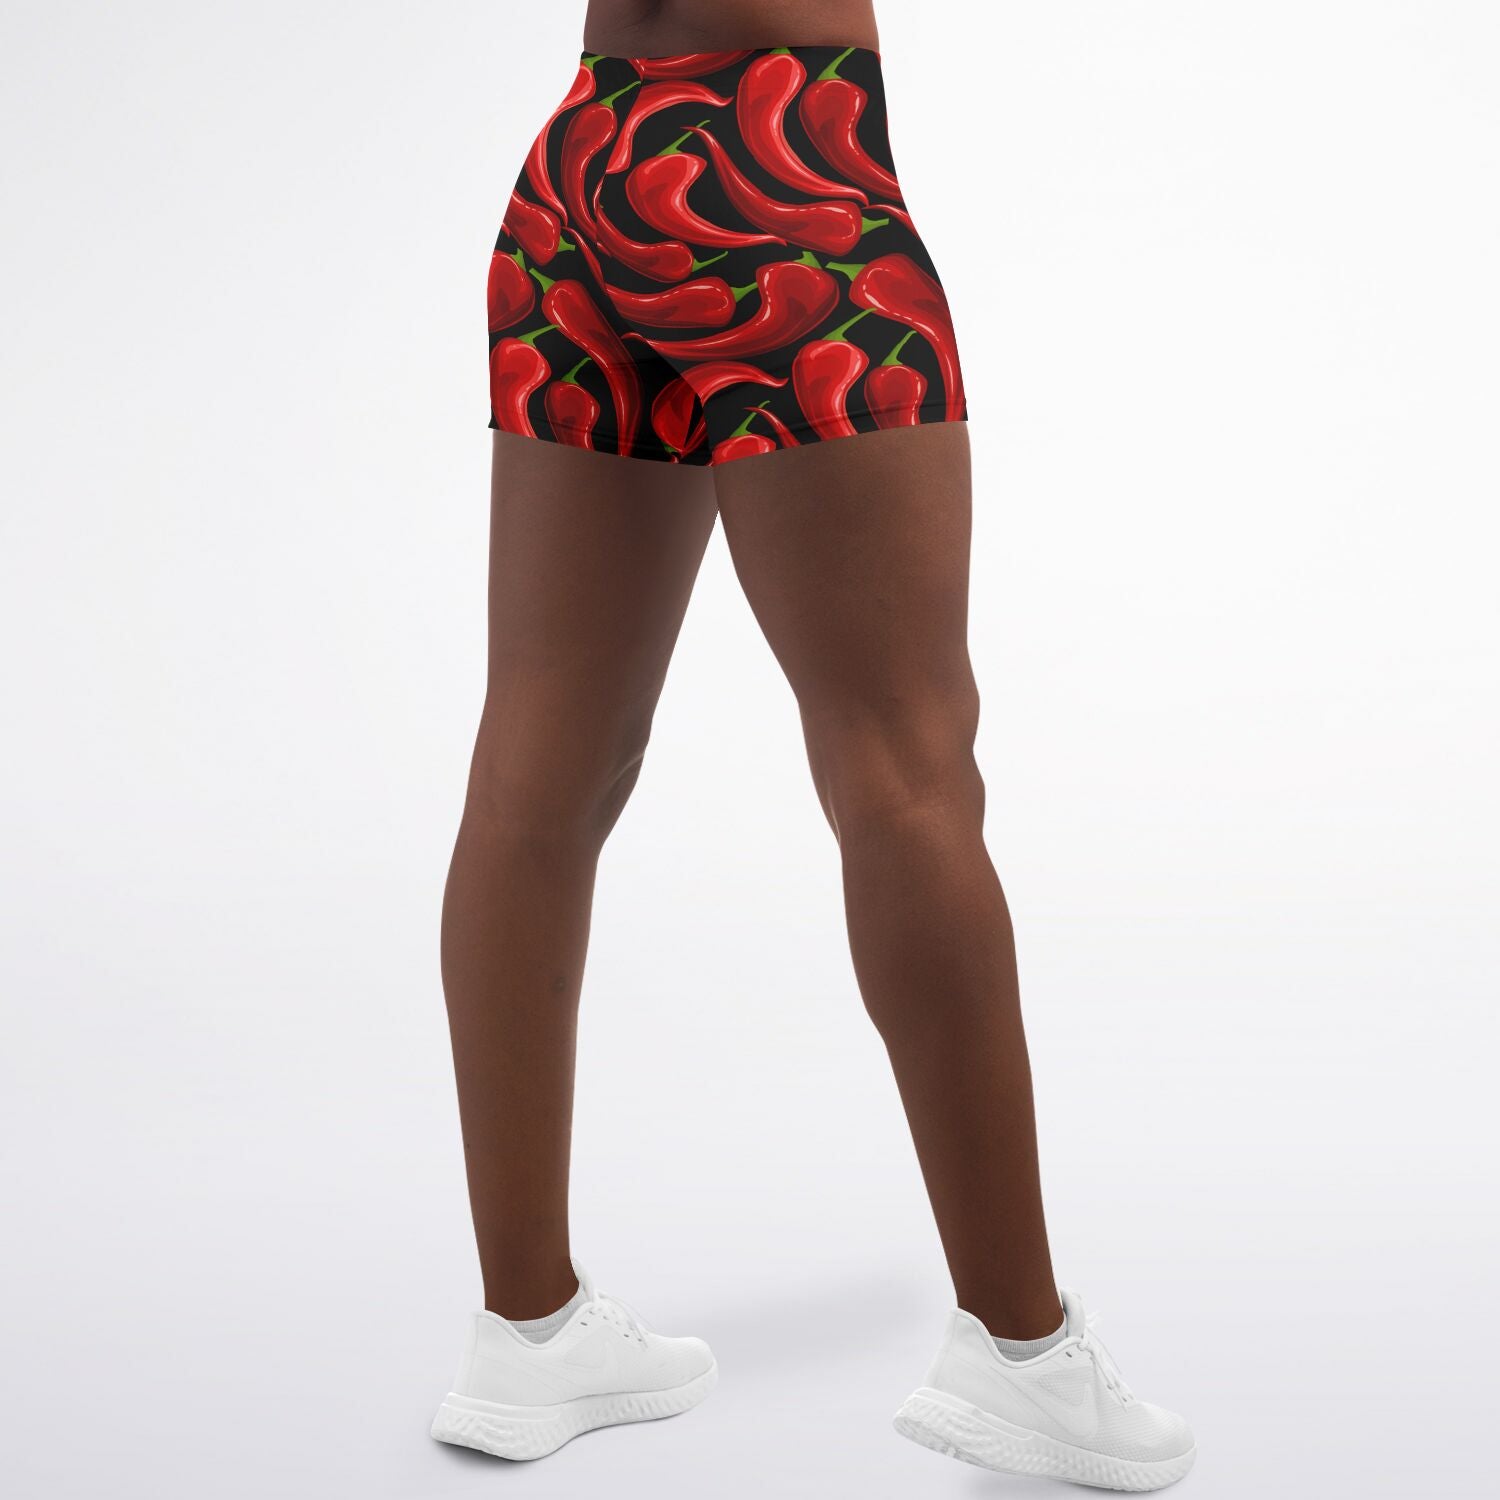 Women's Mid-rise Hot Red Chili Peppers Athletic Booty Shorts